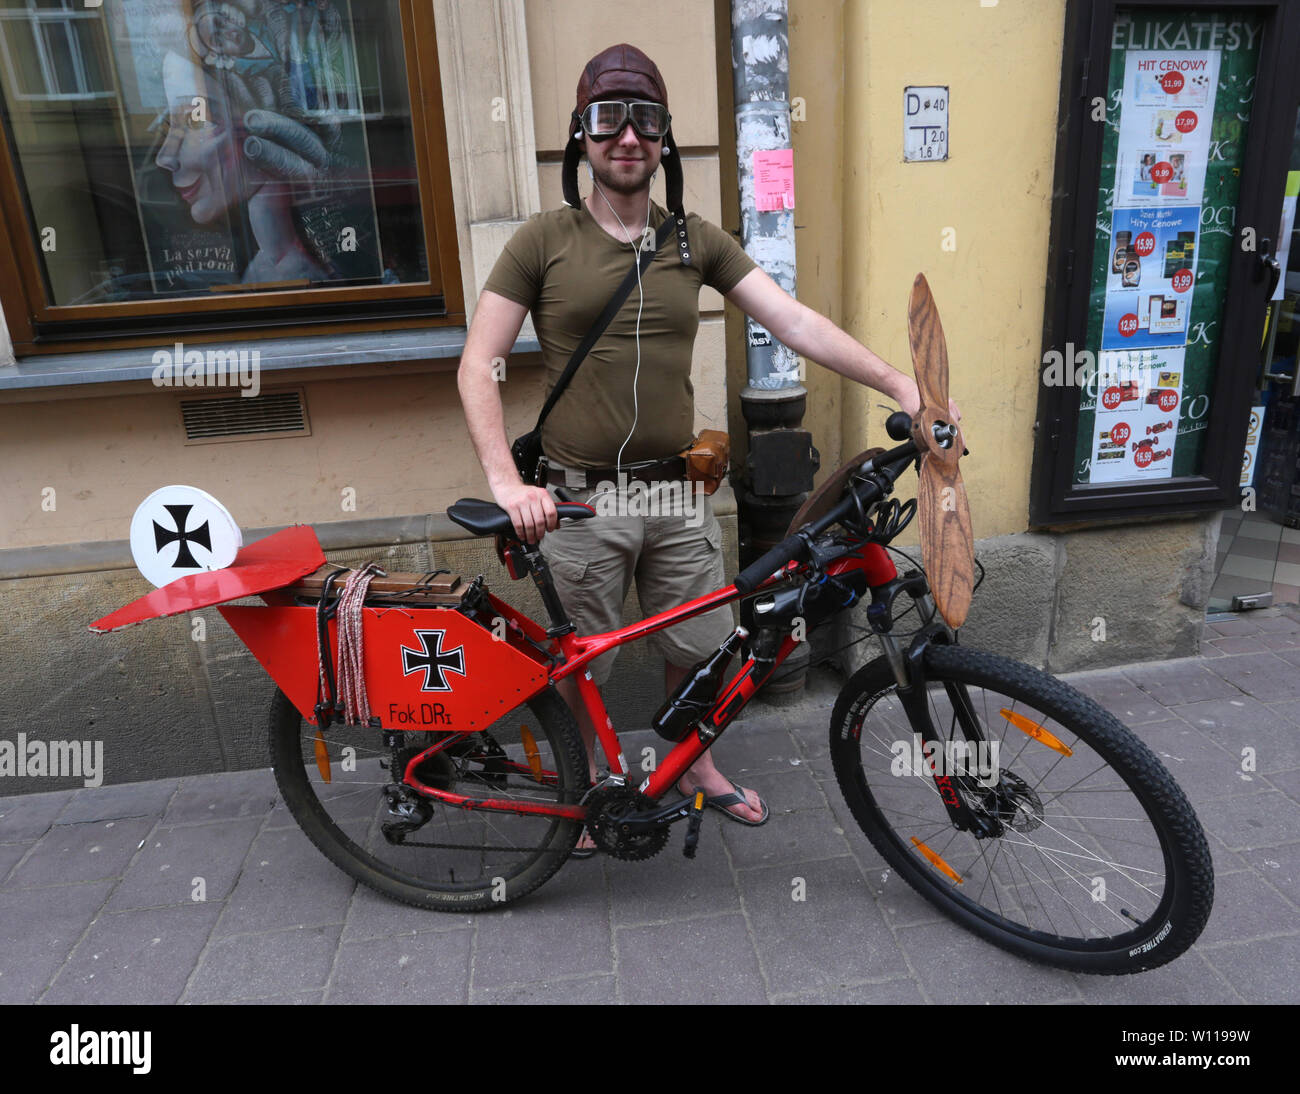 Krakow. Cracow. Poland. The fan of Red Baron Richthofen with his bike made up like red Fokker Dr.1. Stock Photo